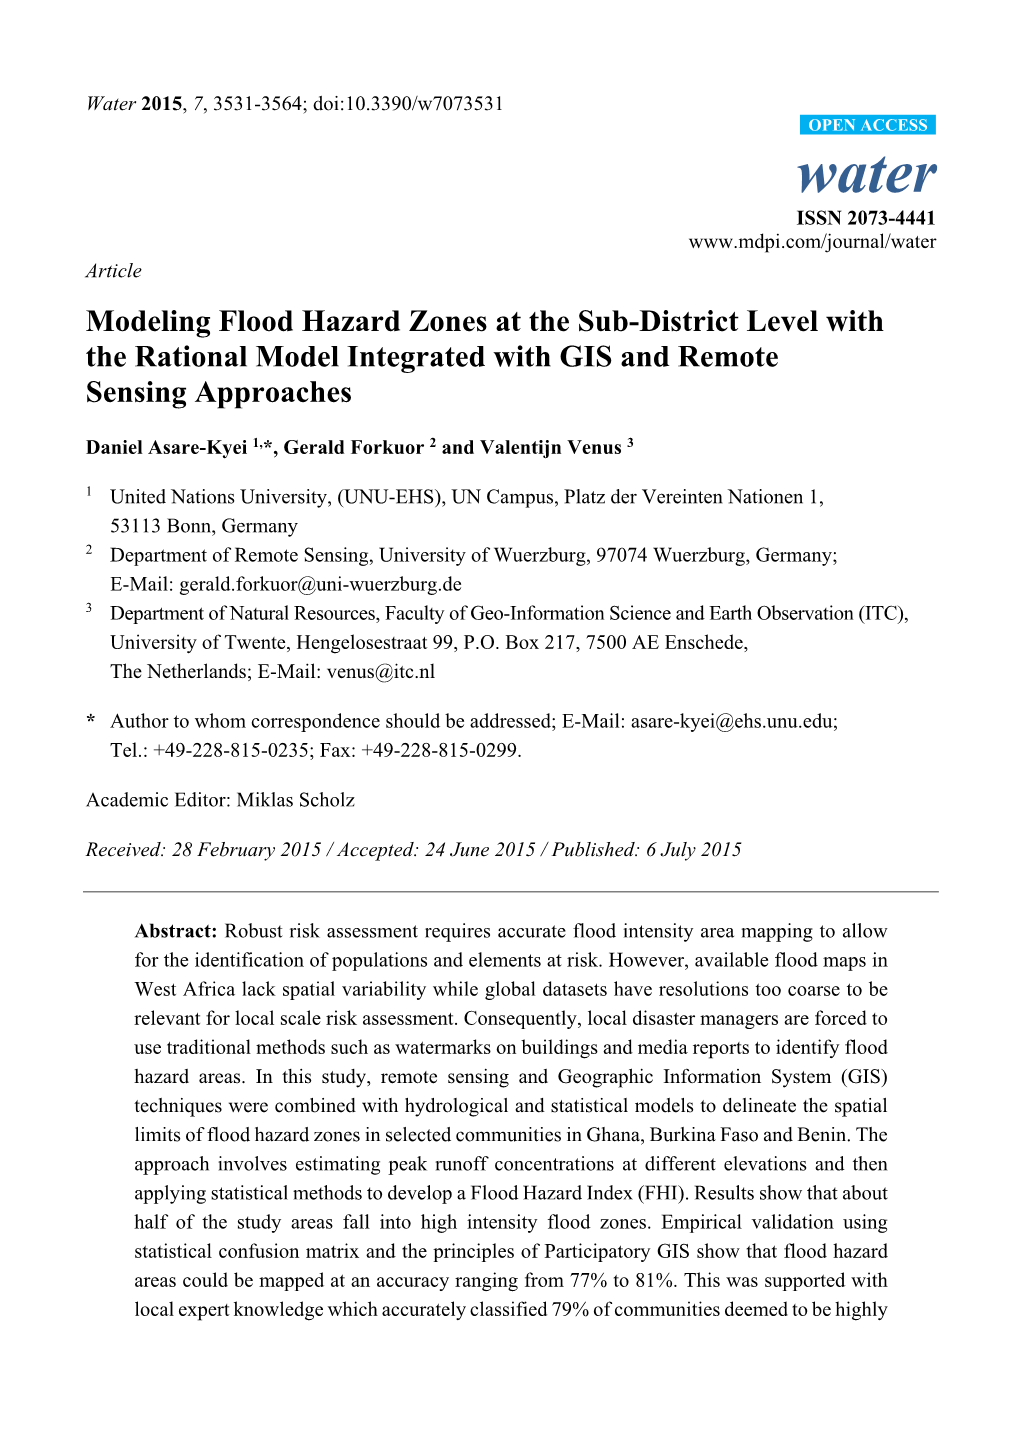 Modeling Flood Hazard Zones at the Sub-District Level with the Rational Model Integrated with GIS and Remote Sensing Approaches